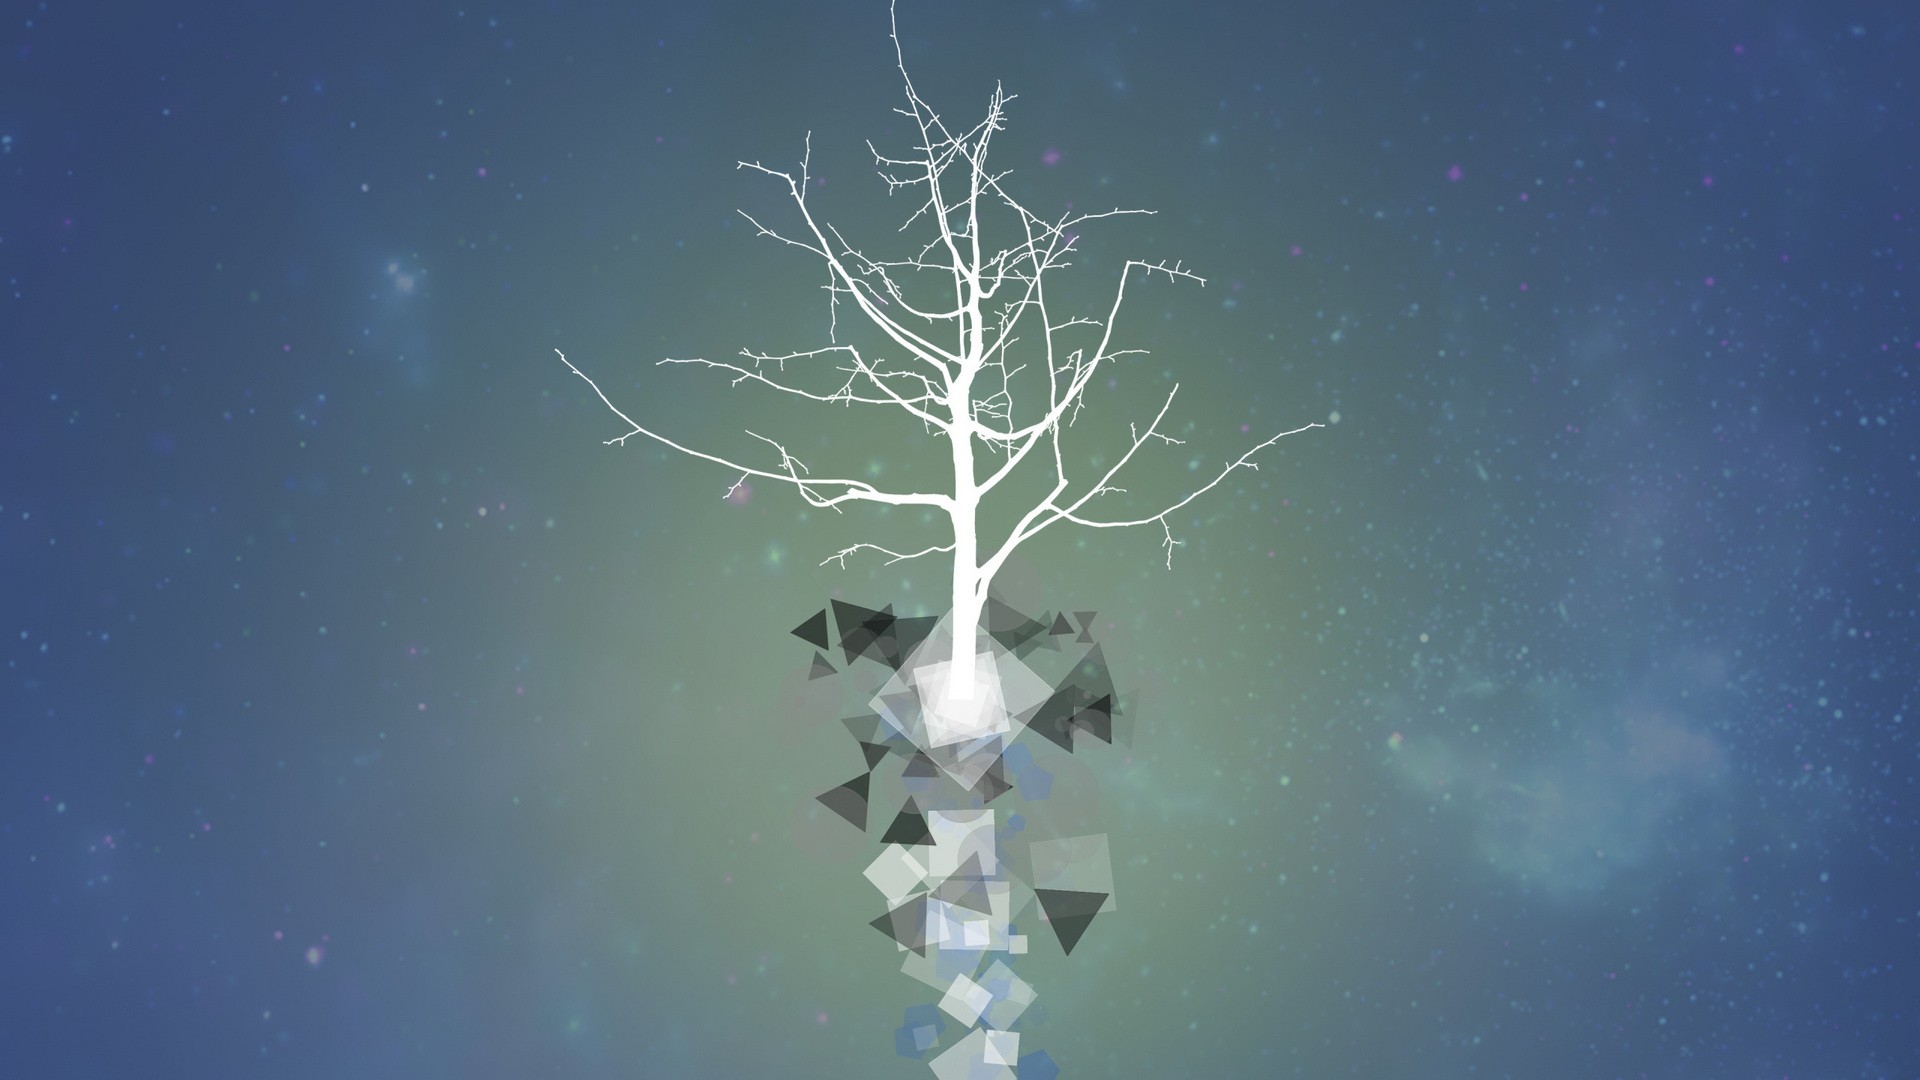 Abstract Tree hd background